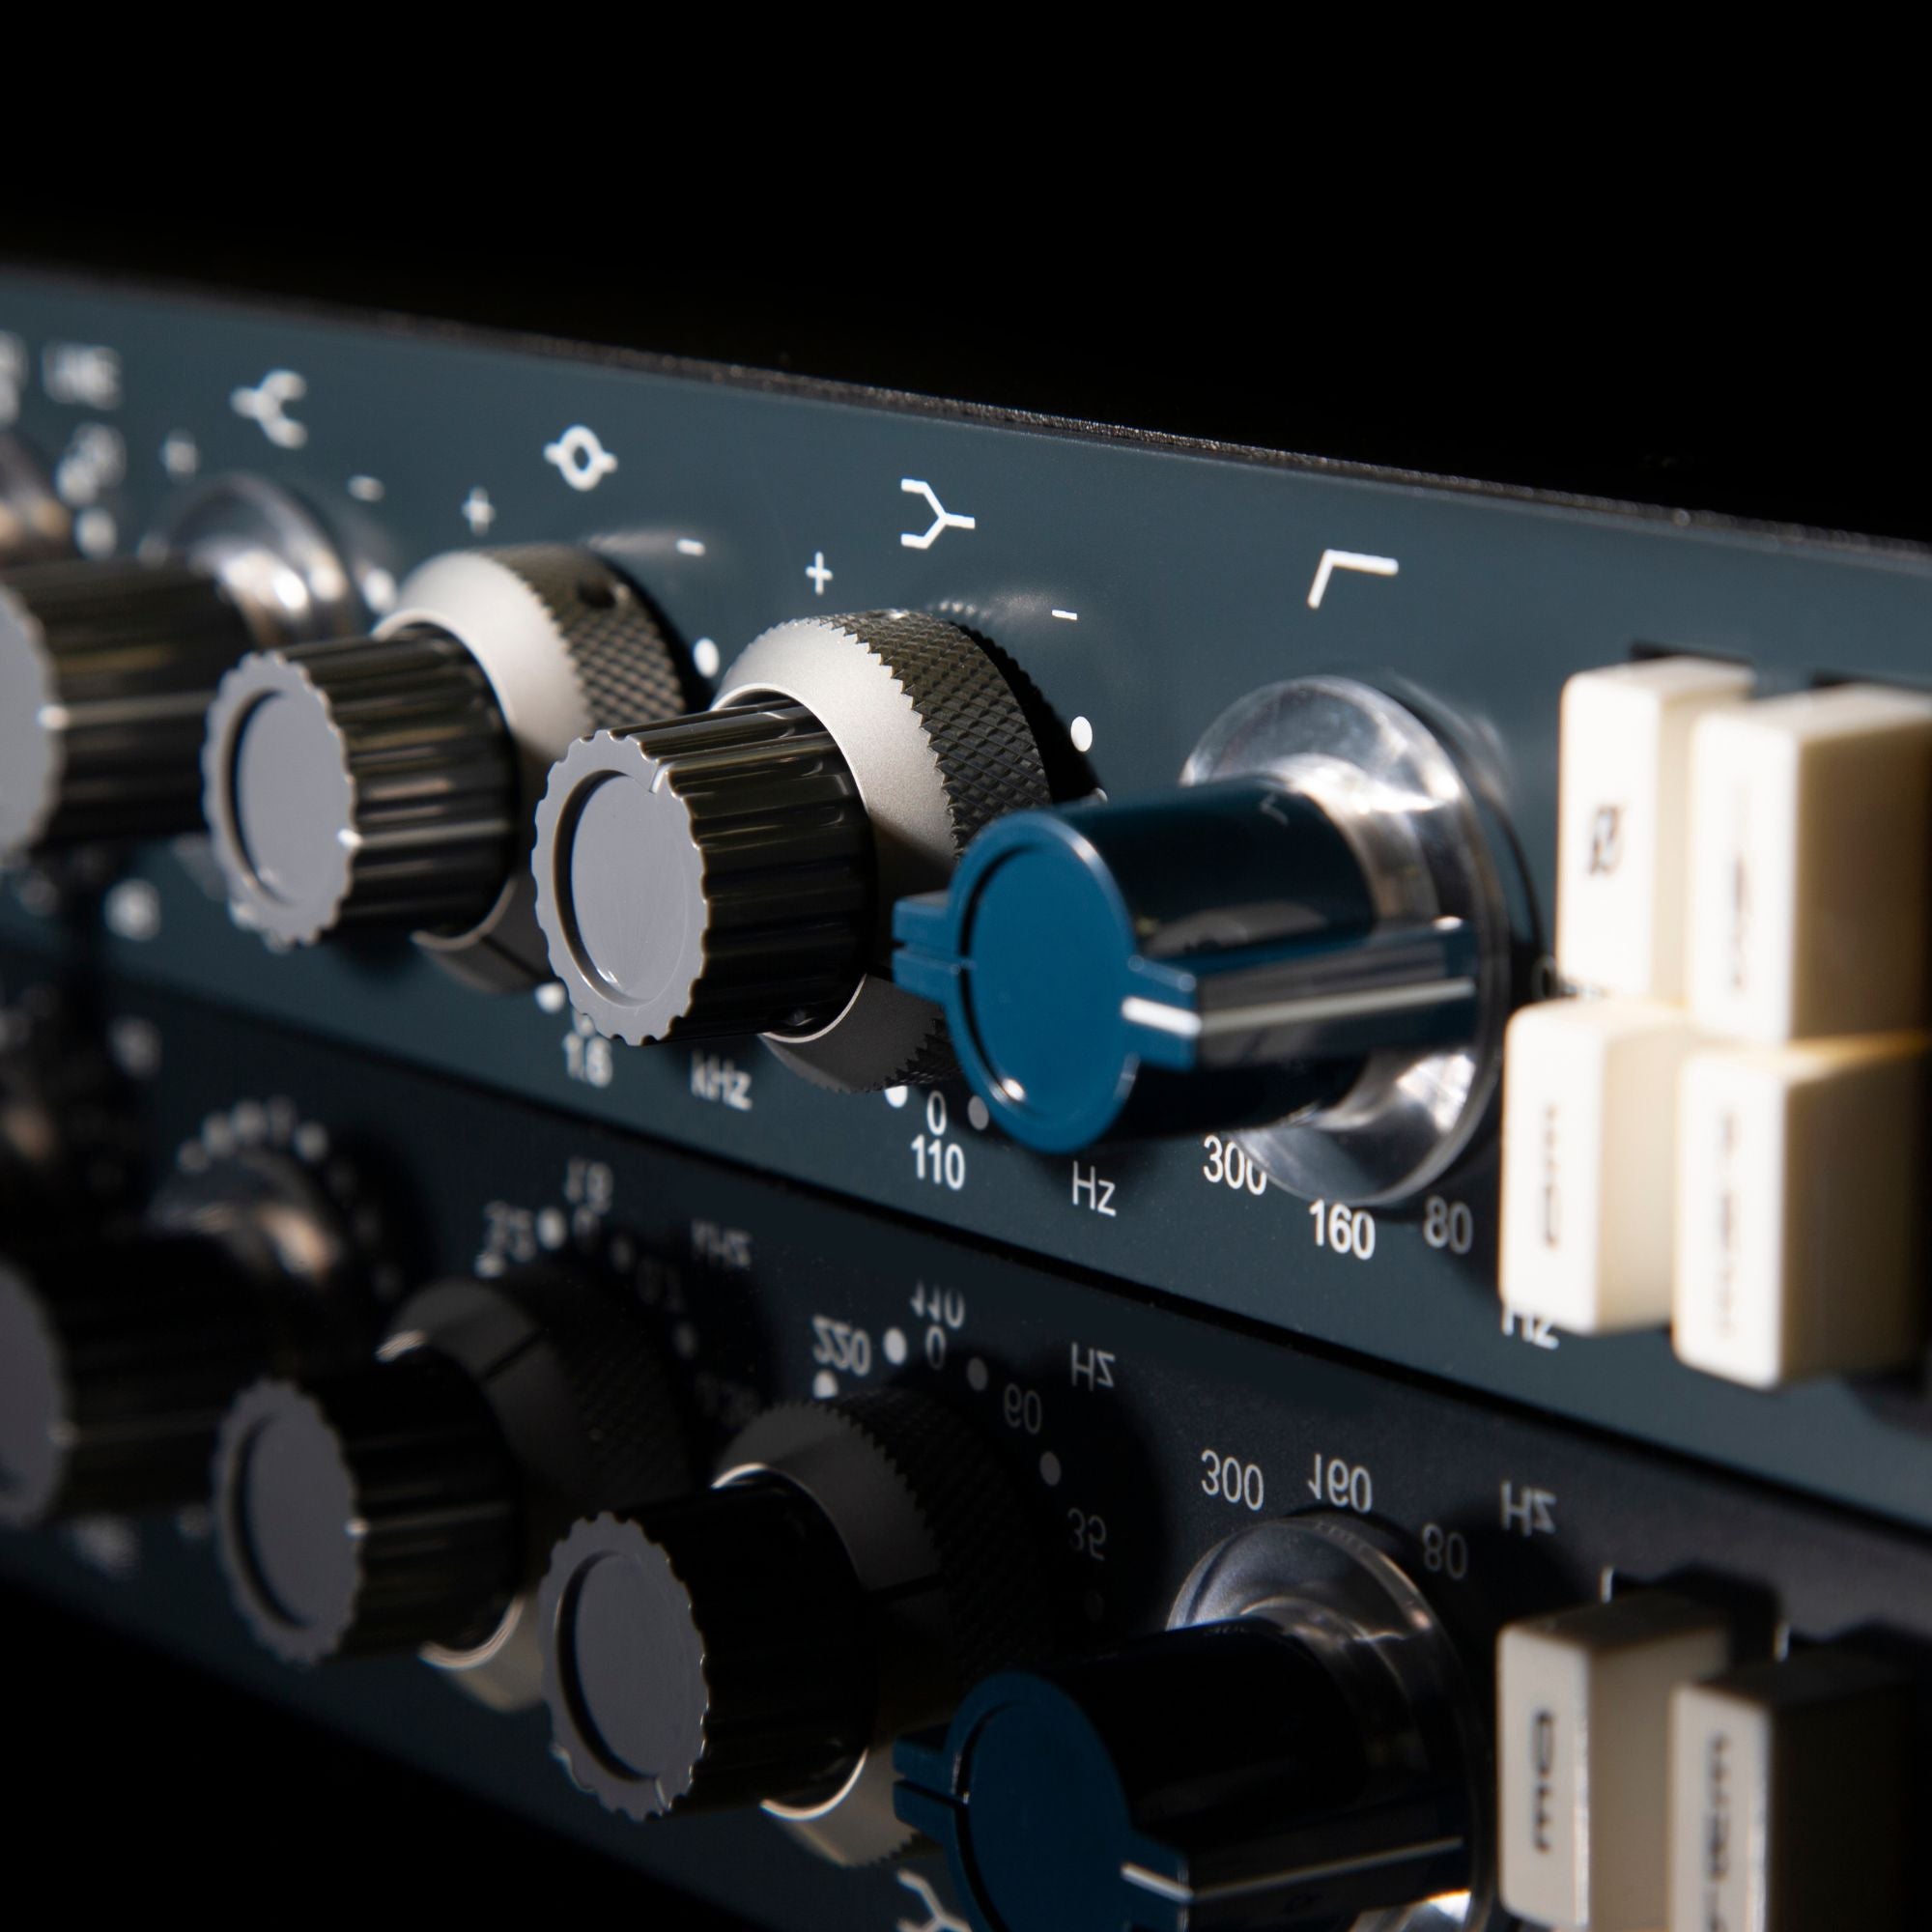 AMS Neve 1073SPX-D - The World’s First Genuine 1073® Interface